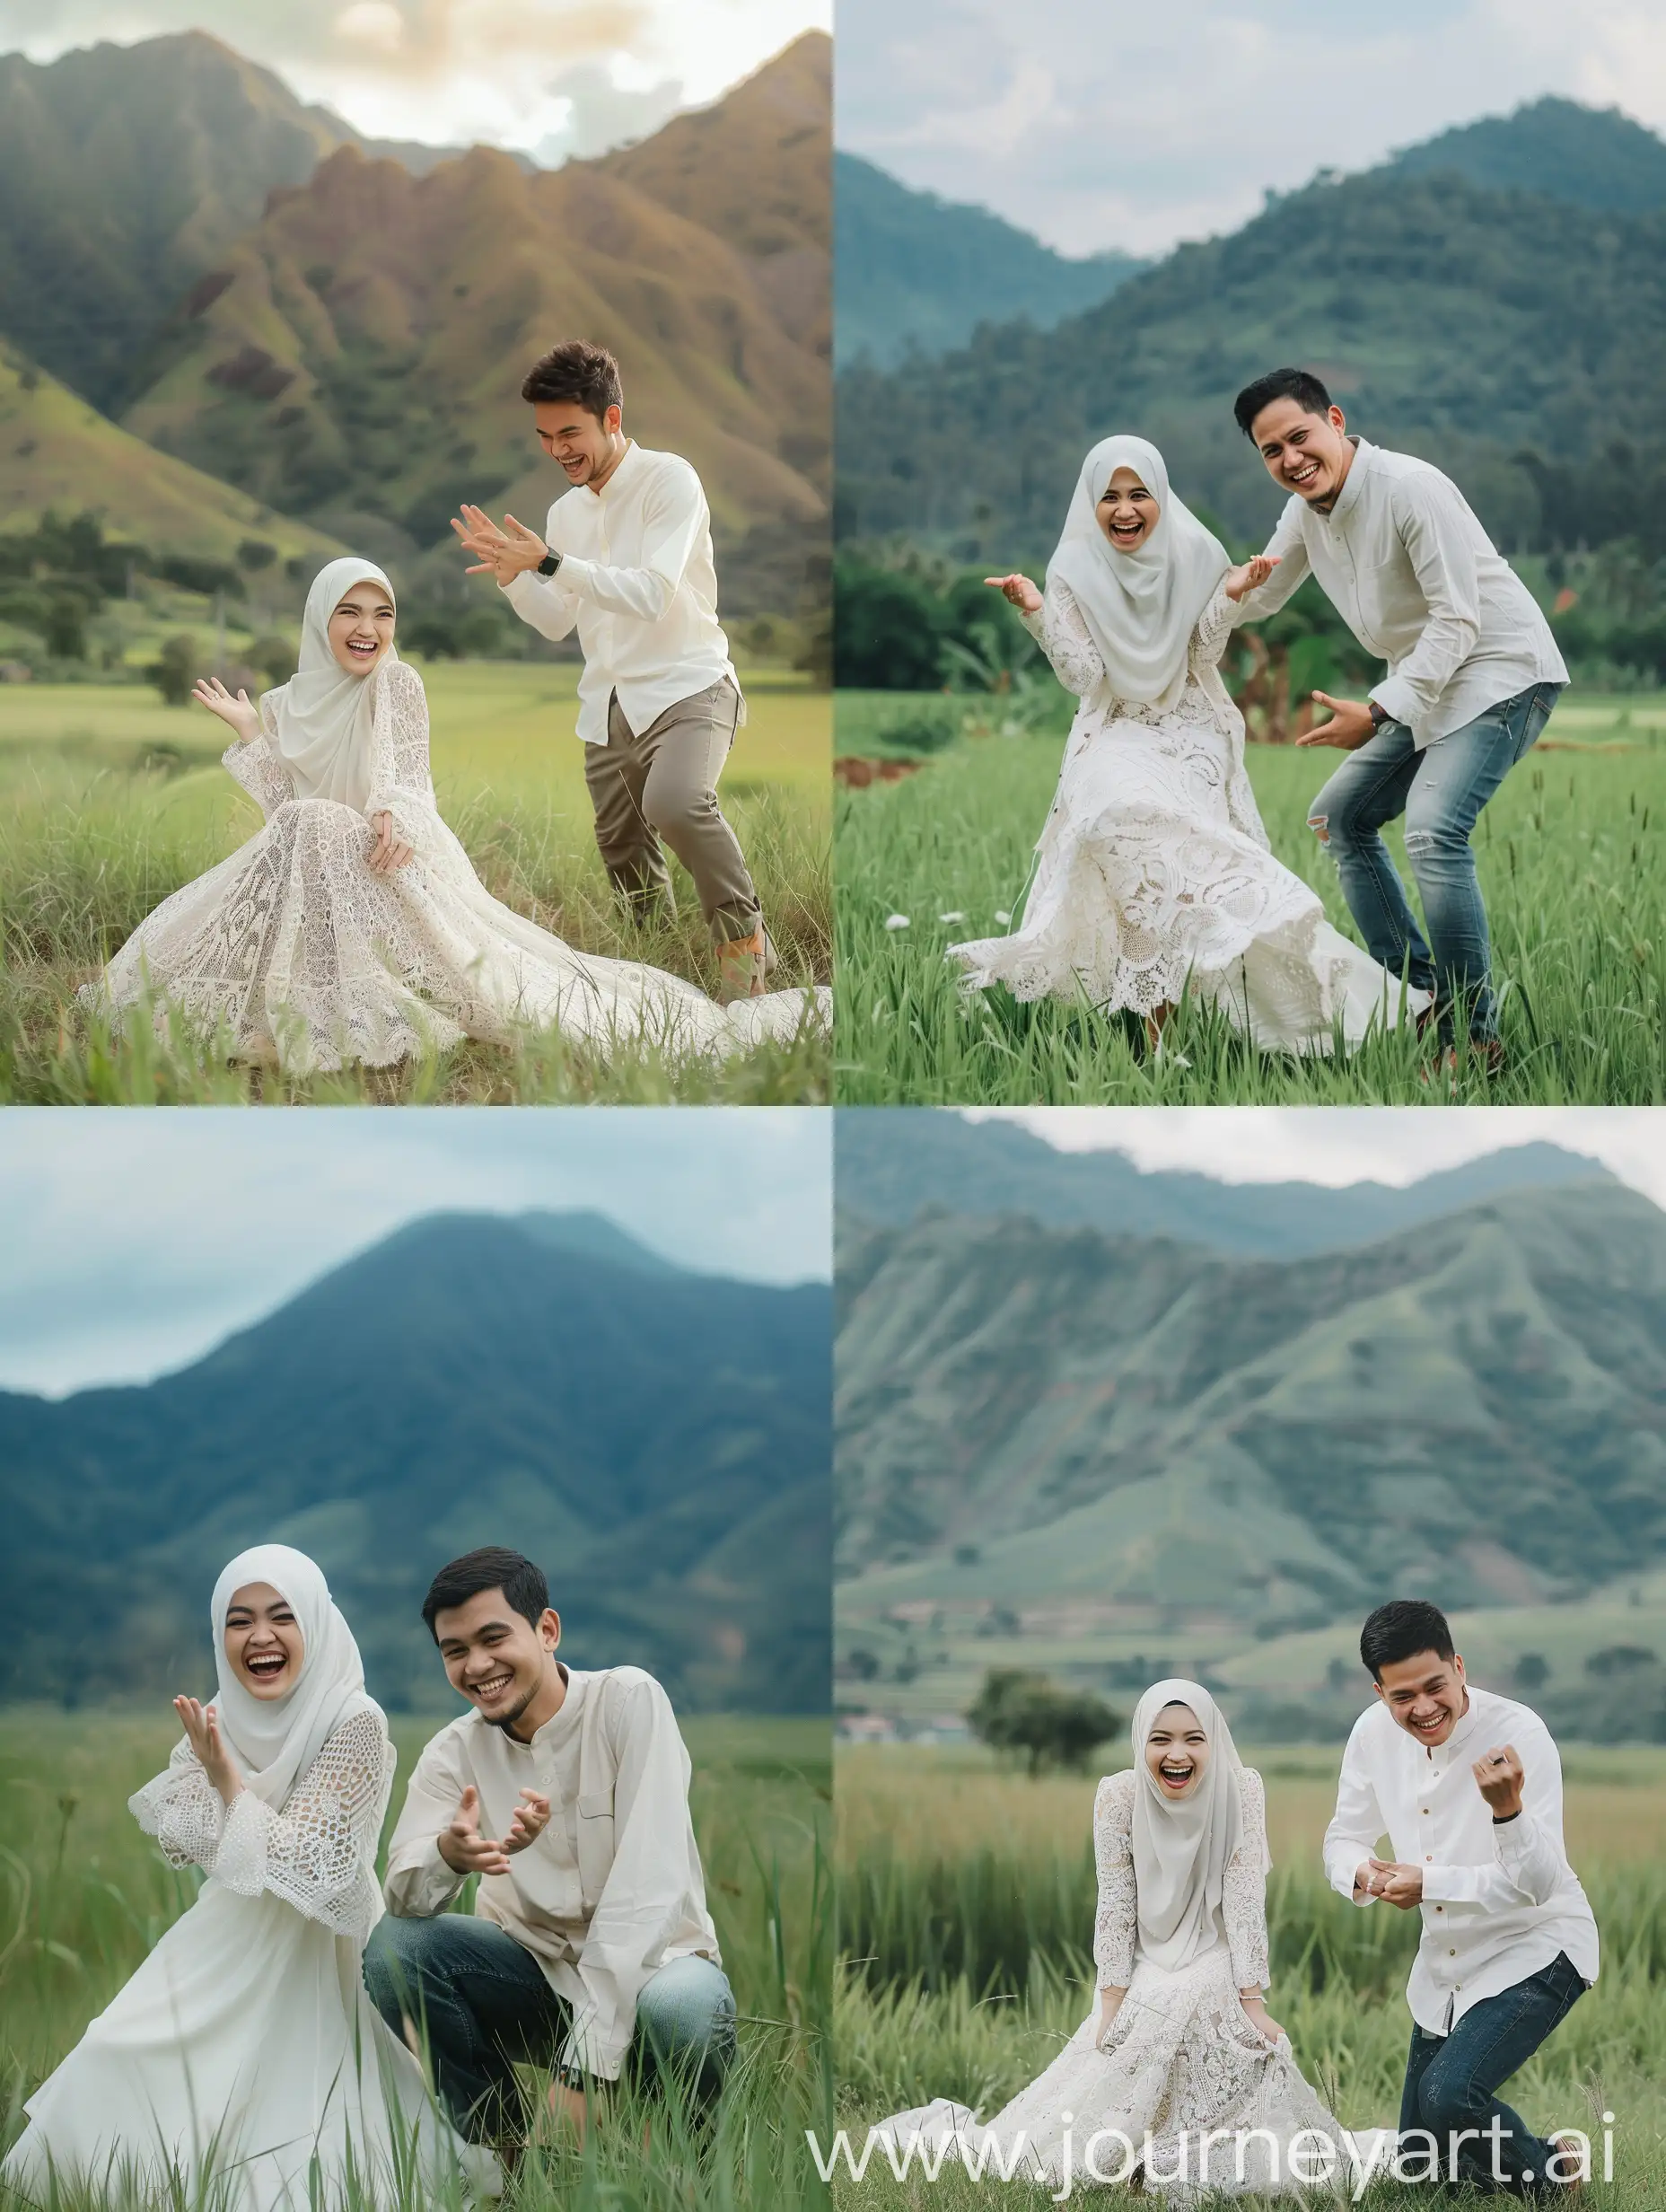 An enchanting photo of an Indonesian couple doing the laughing pose. She is wearing a hijab and long white dress while he wears a plain shirt with jeans pants. They stand in front of a green grass field near mountains in the background. The woman poses on her knees while the man poses next to his wife making a hand up gesture as if to laugh.